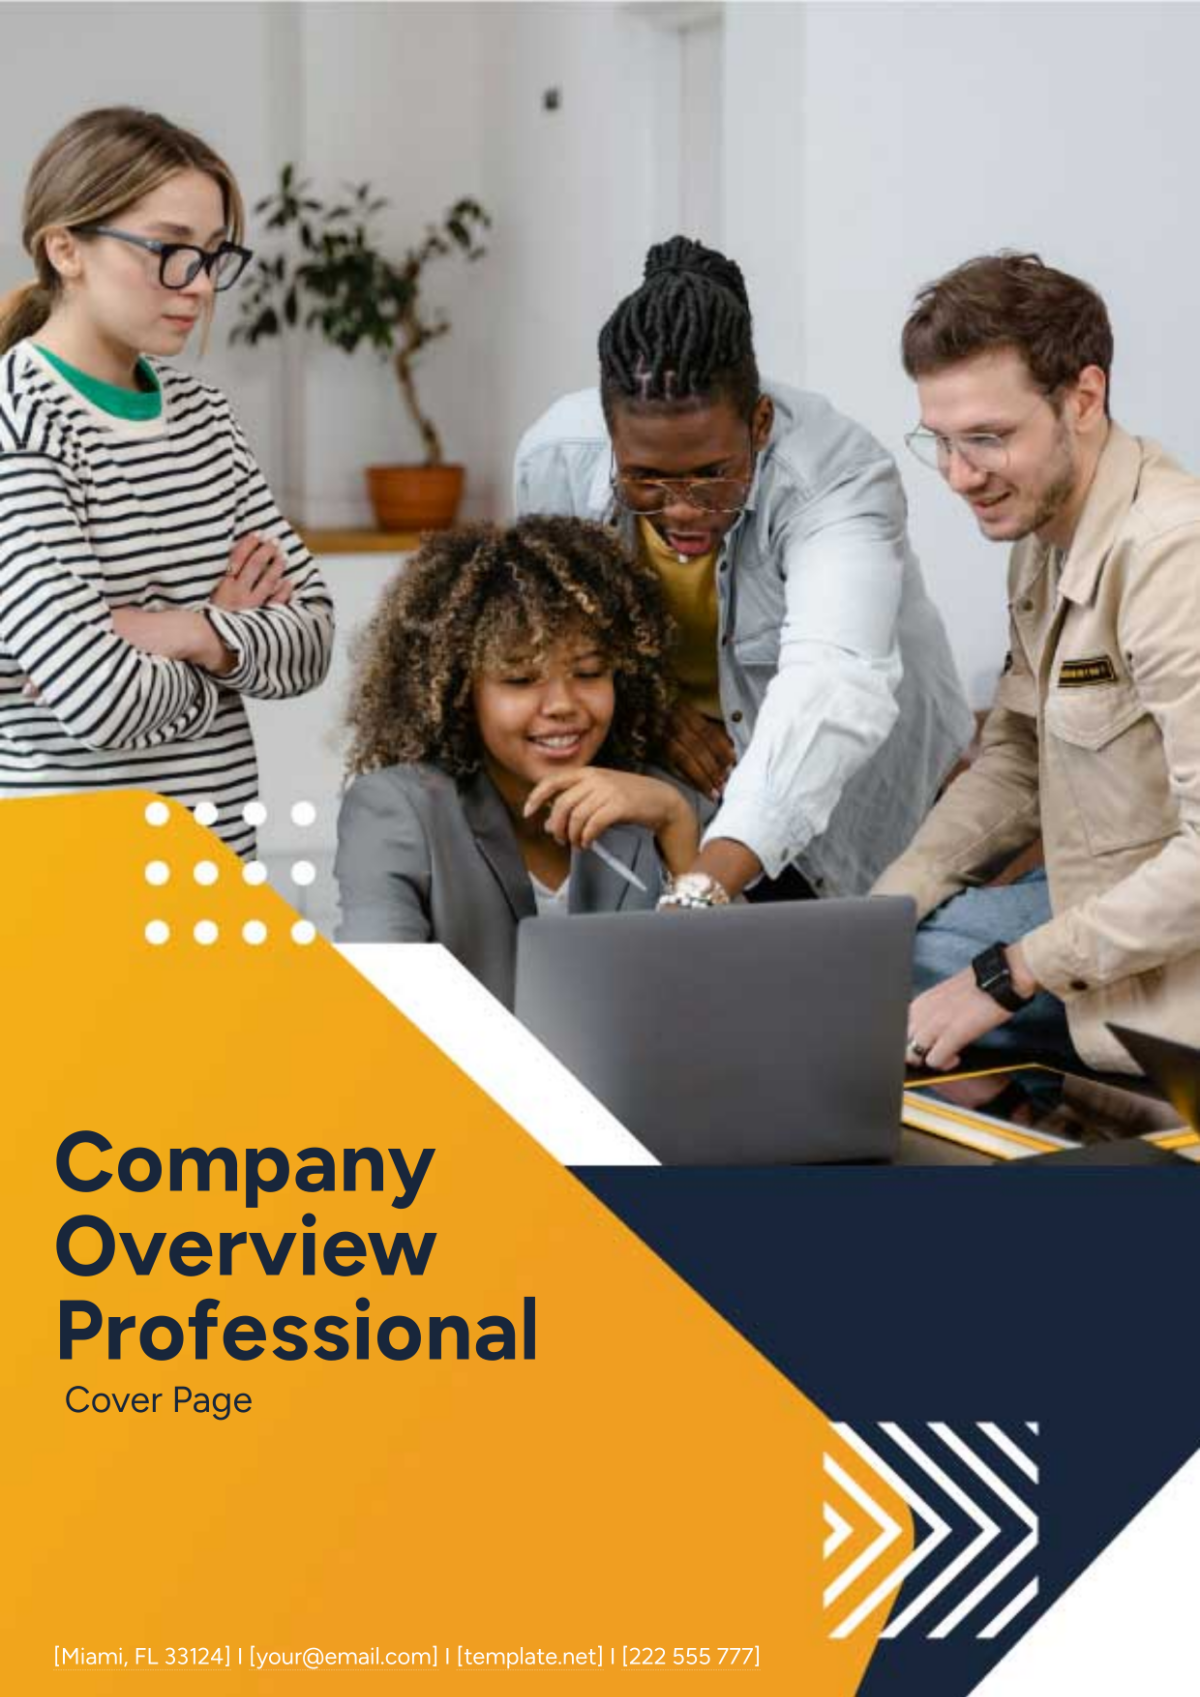 Company Overview Professional Cover Page Template